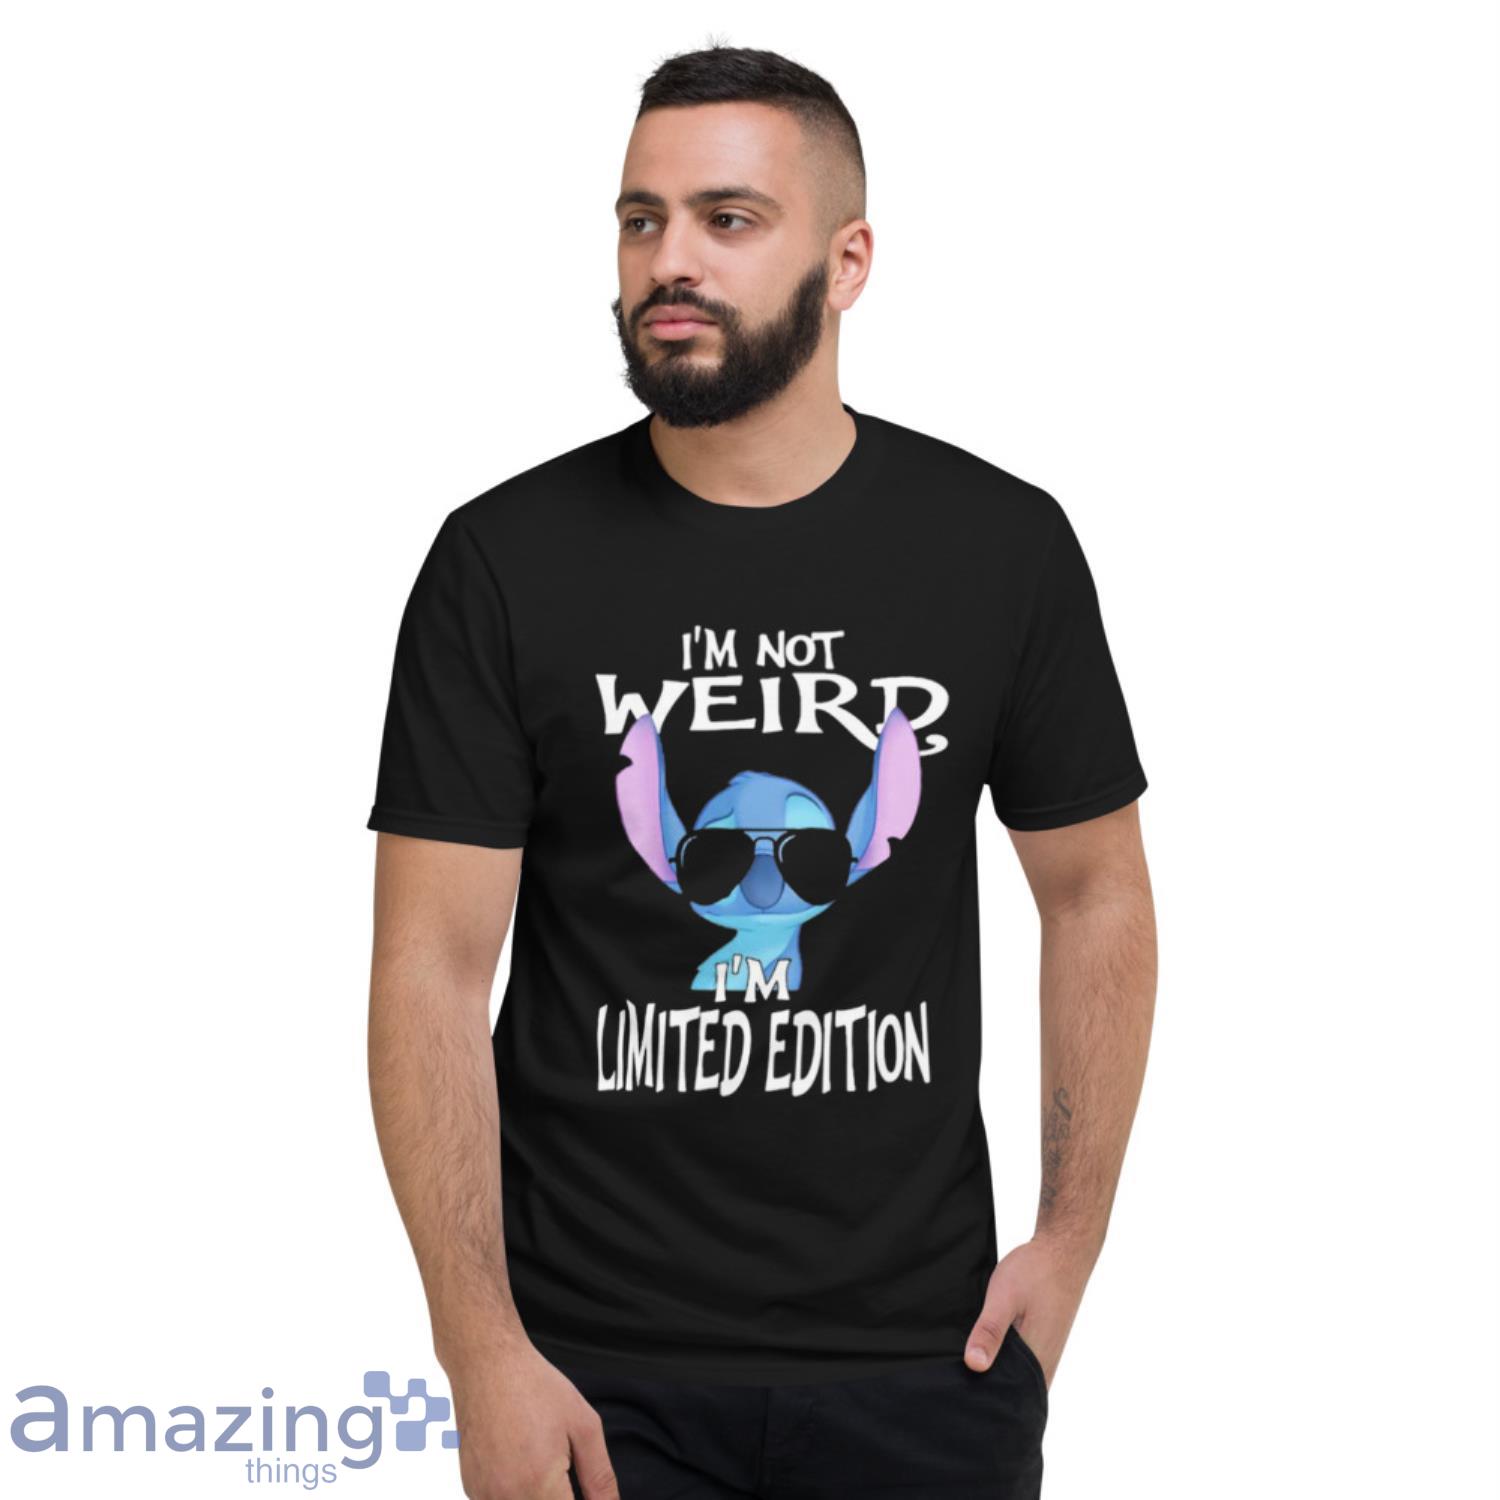 I'm Not Weird I'm Limited Edition - Cool Funny Shirts